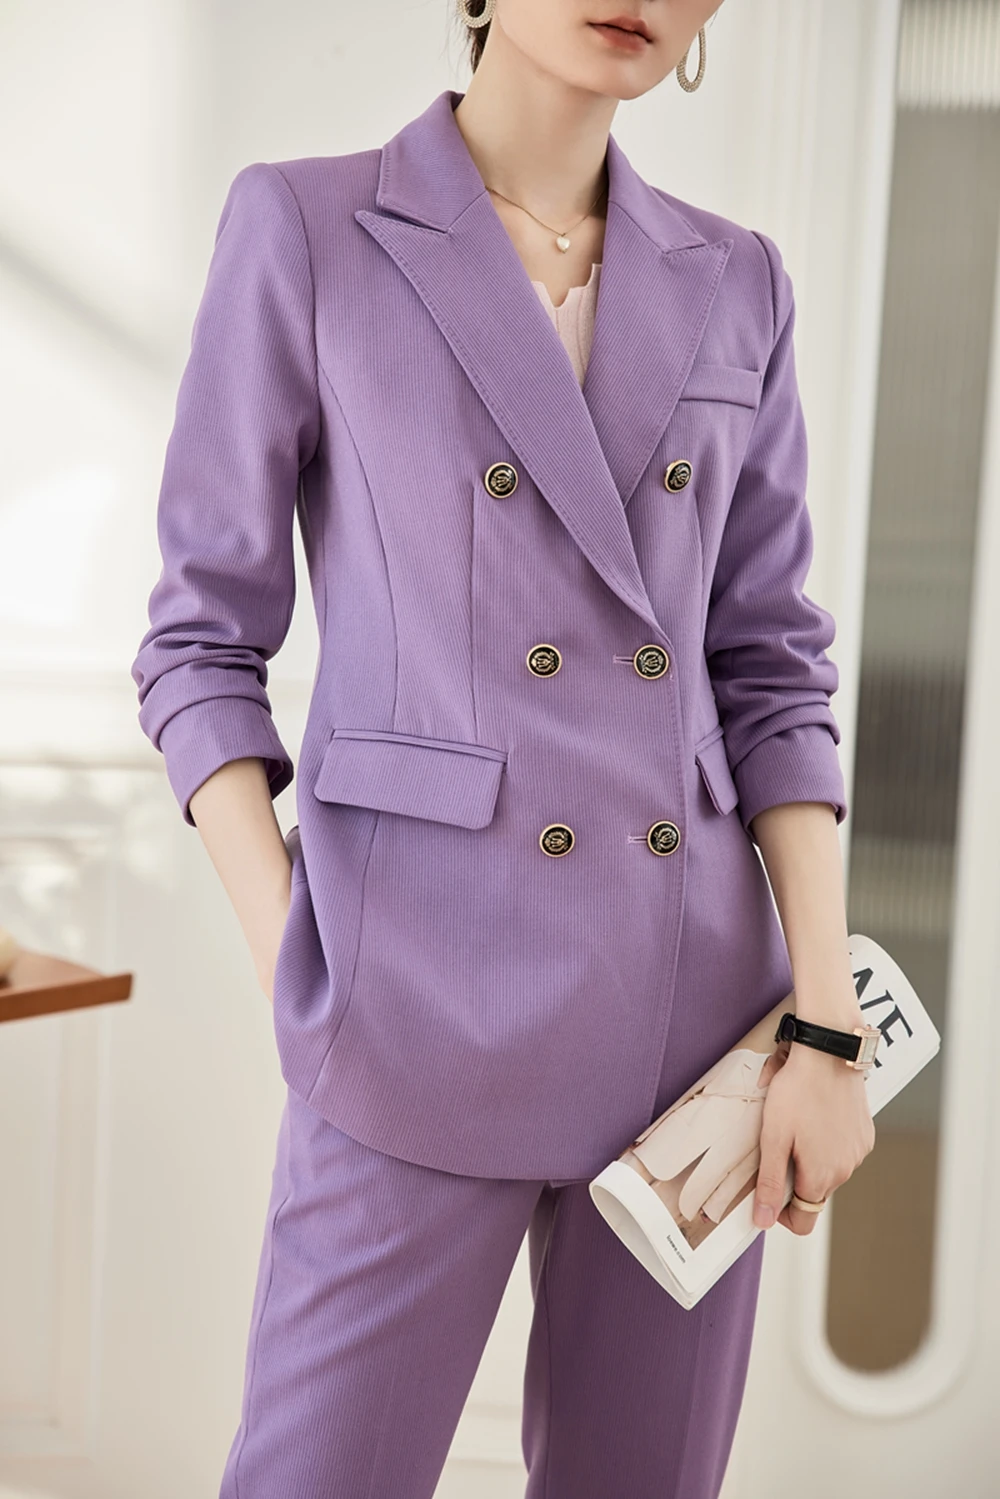 Green casual suit jacket Women's autumn design sense Small number of hosts interview formal work clothes waist closing suit suit